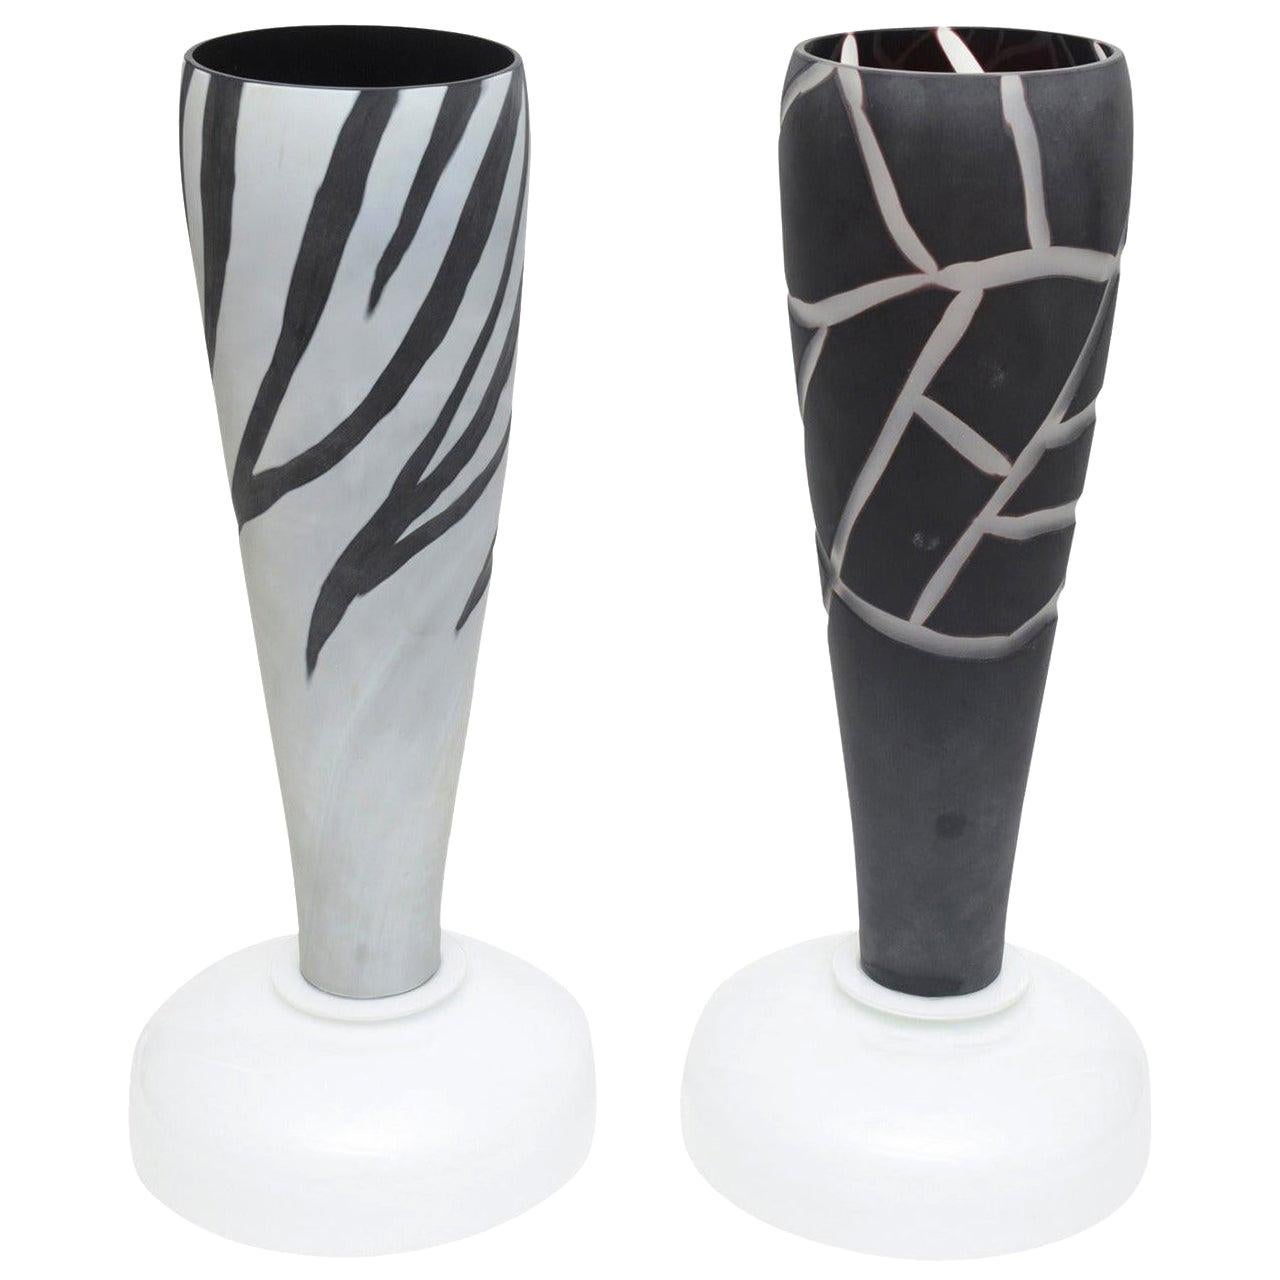 These wonderful pair of Italian Murano intaglio etched Mazzega unusual table lamps are for high drama and beauty. Gray on black and black on gray... frosted glass. The reverse design on each lamp makes quite the statement on either side of a